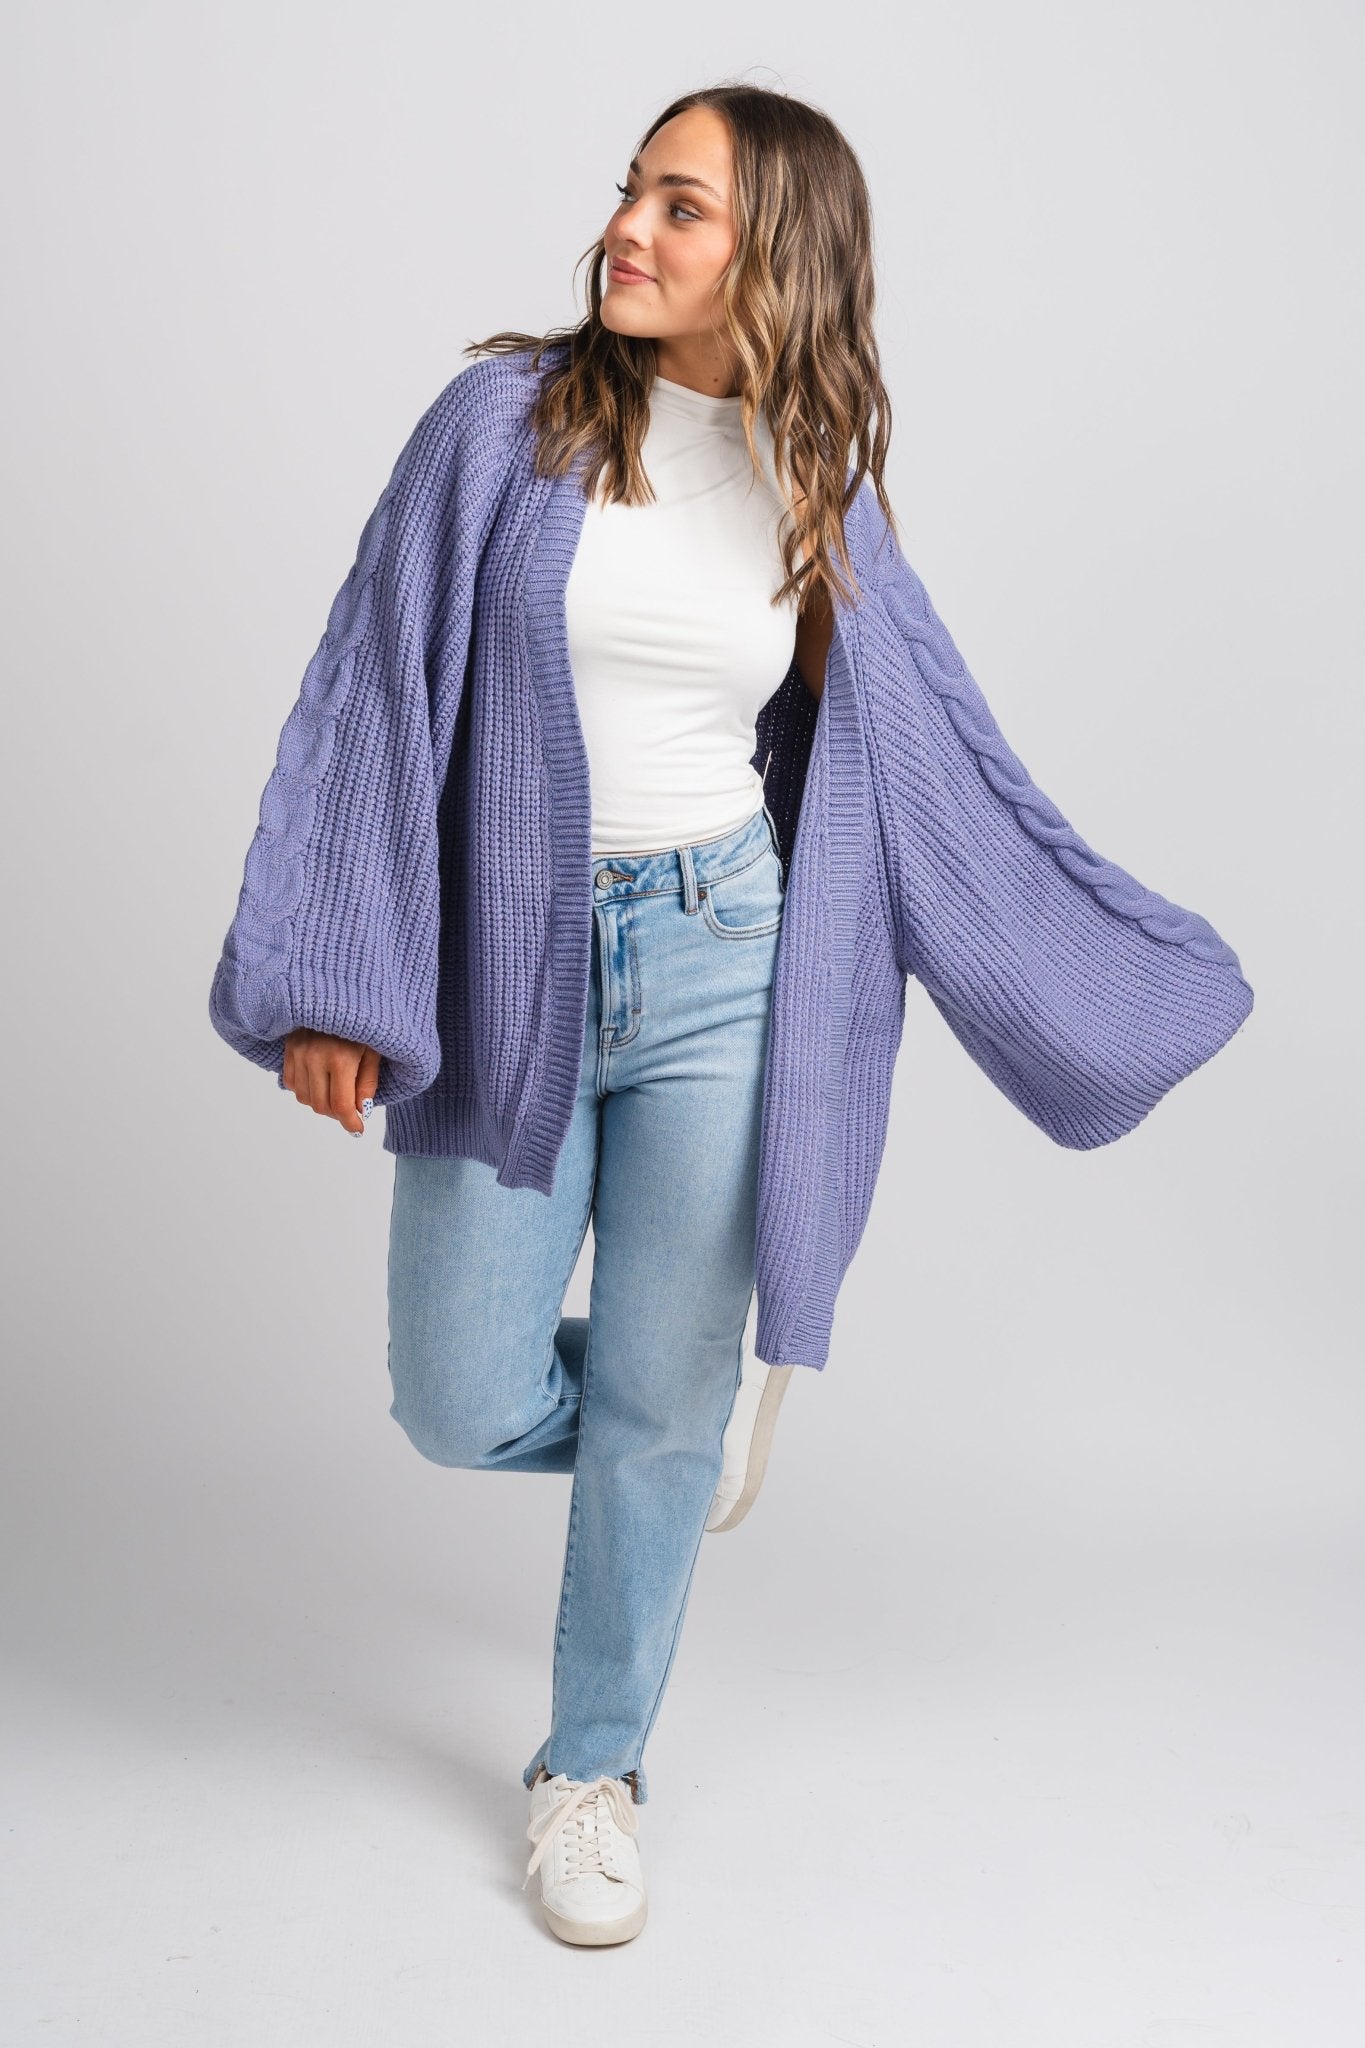 Cable knit cardigan periwinkle - Cute Cardigan - Trendy Easter Clothing Line at Lush Fashion Lounge Boutique in Oklahoma